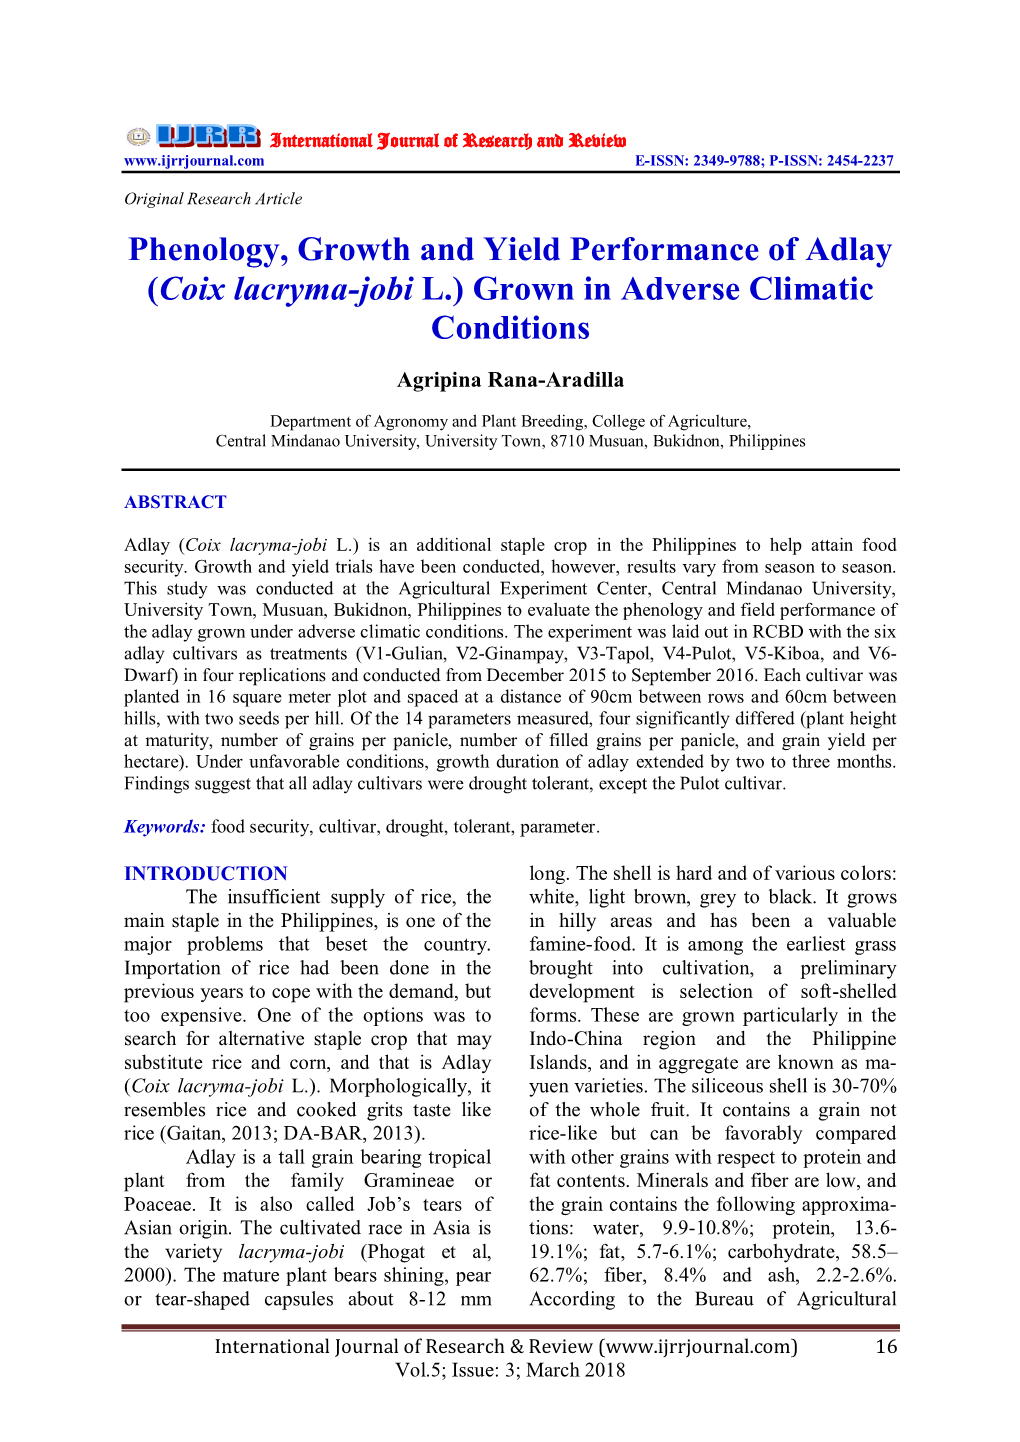 Phenology, Growth and Yield Performance of Adlay (Coix Lacryma-Jobi L.) Grown in Adverse Climatic Conditions